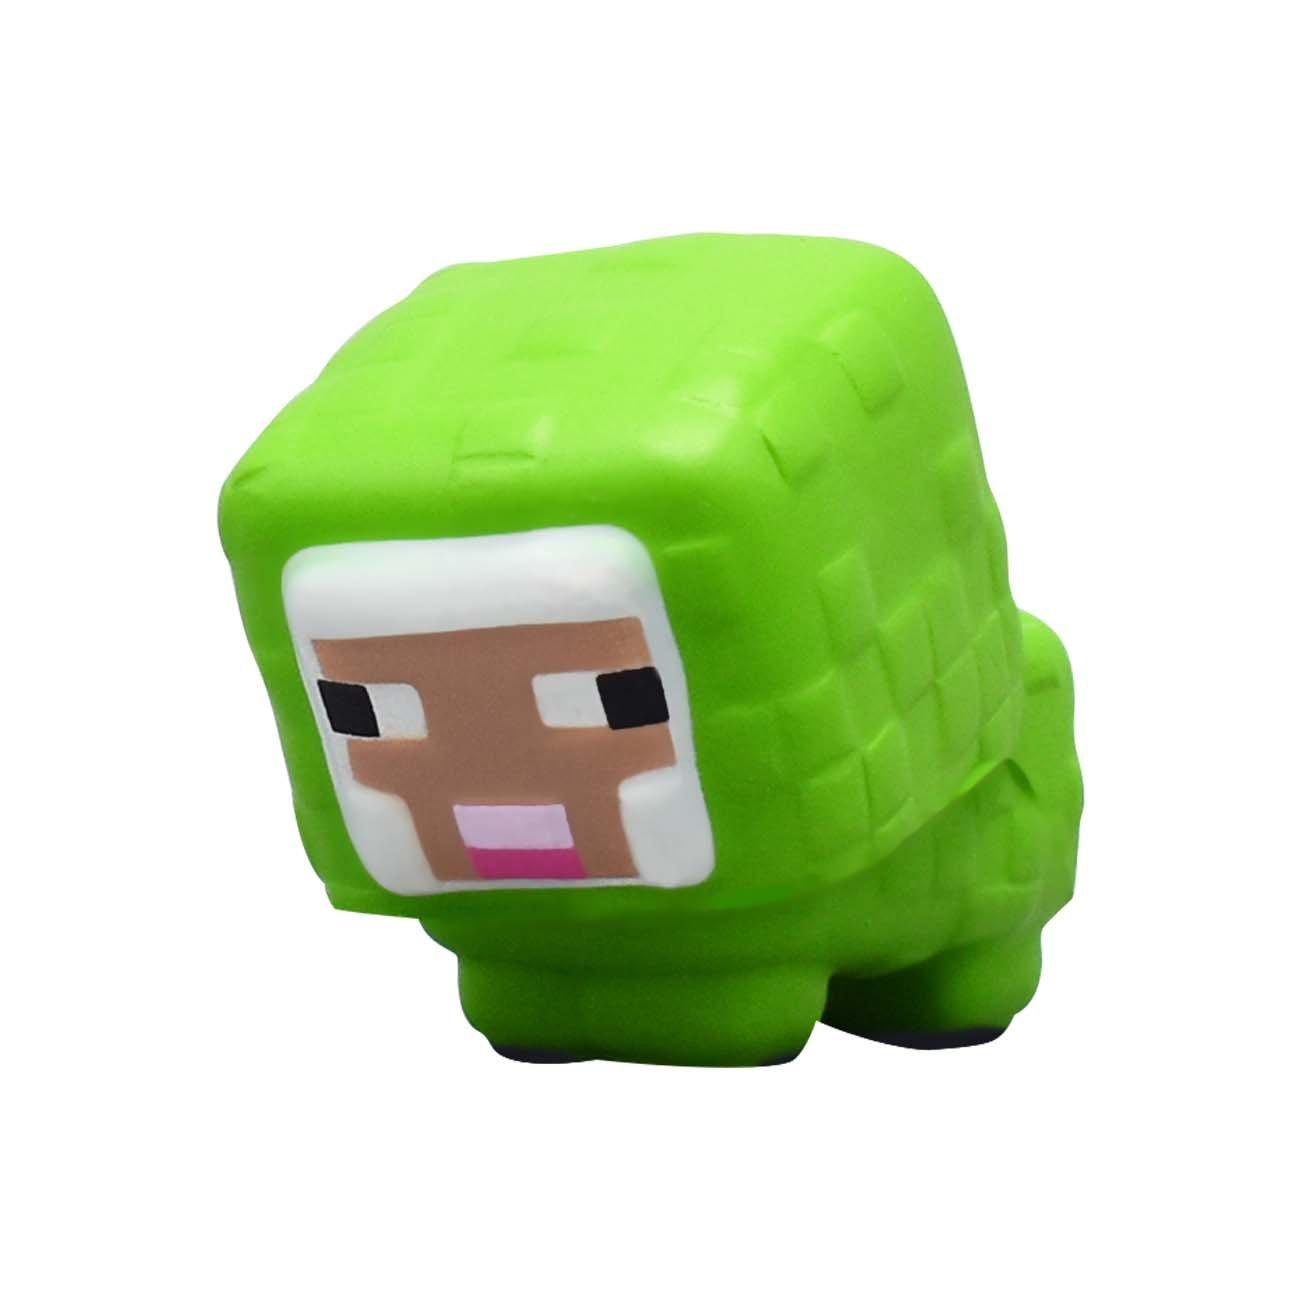 list item 6 of 9 Minecraft SquishMe Series 2 Bling Bag